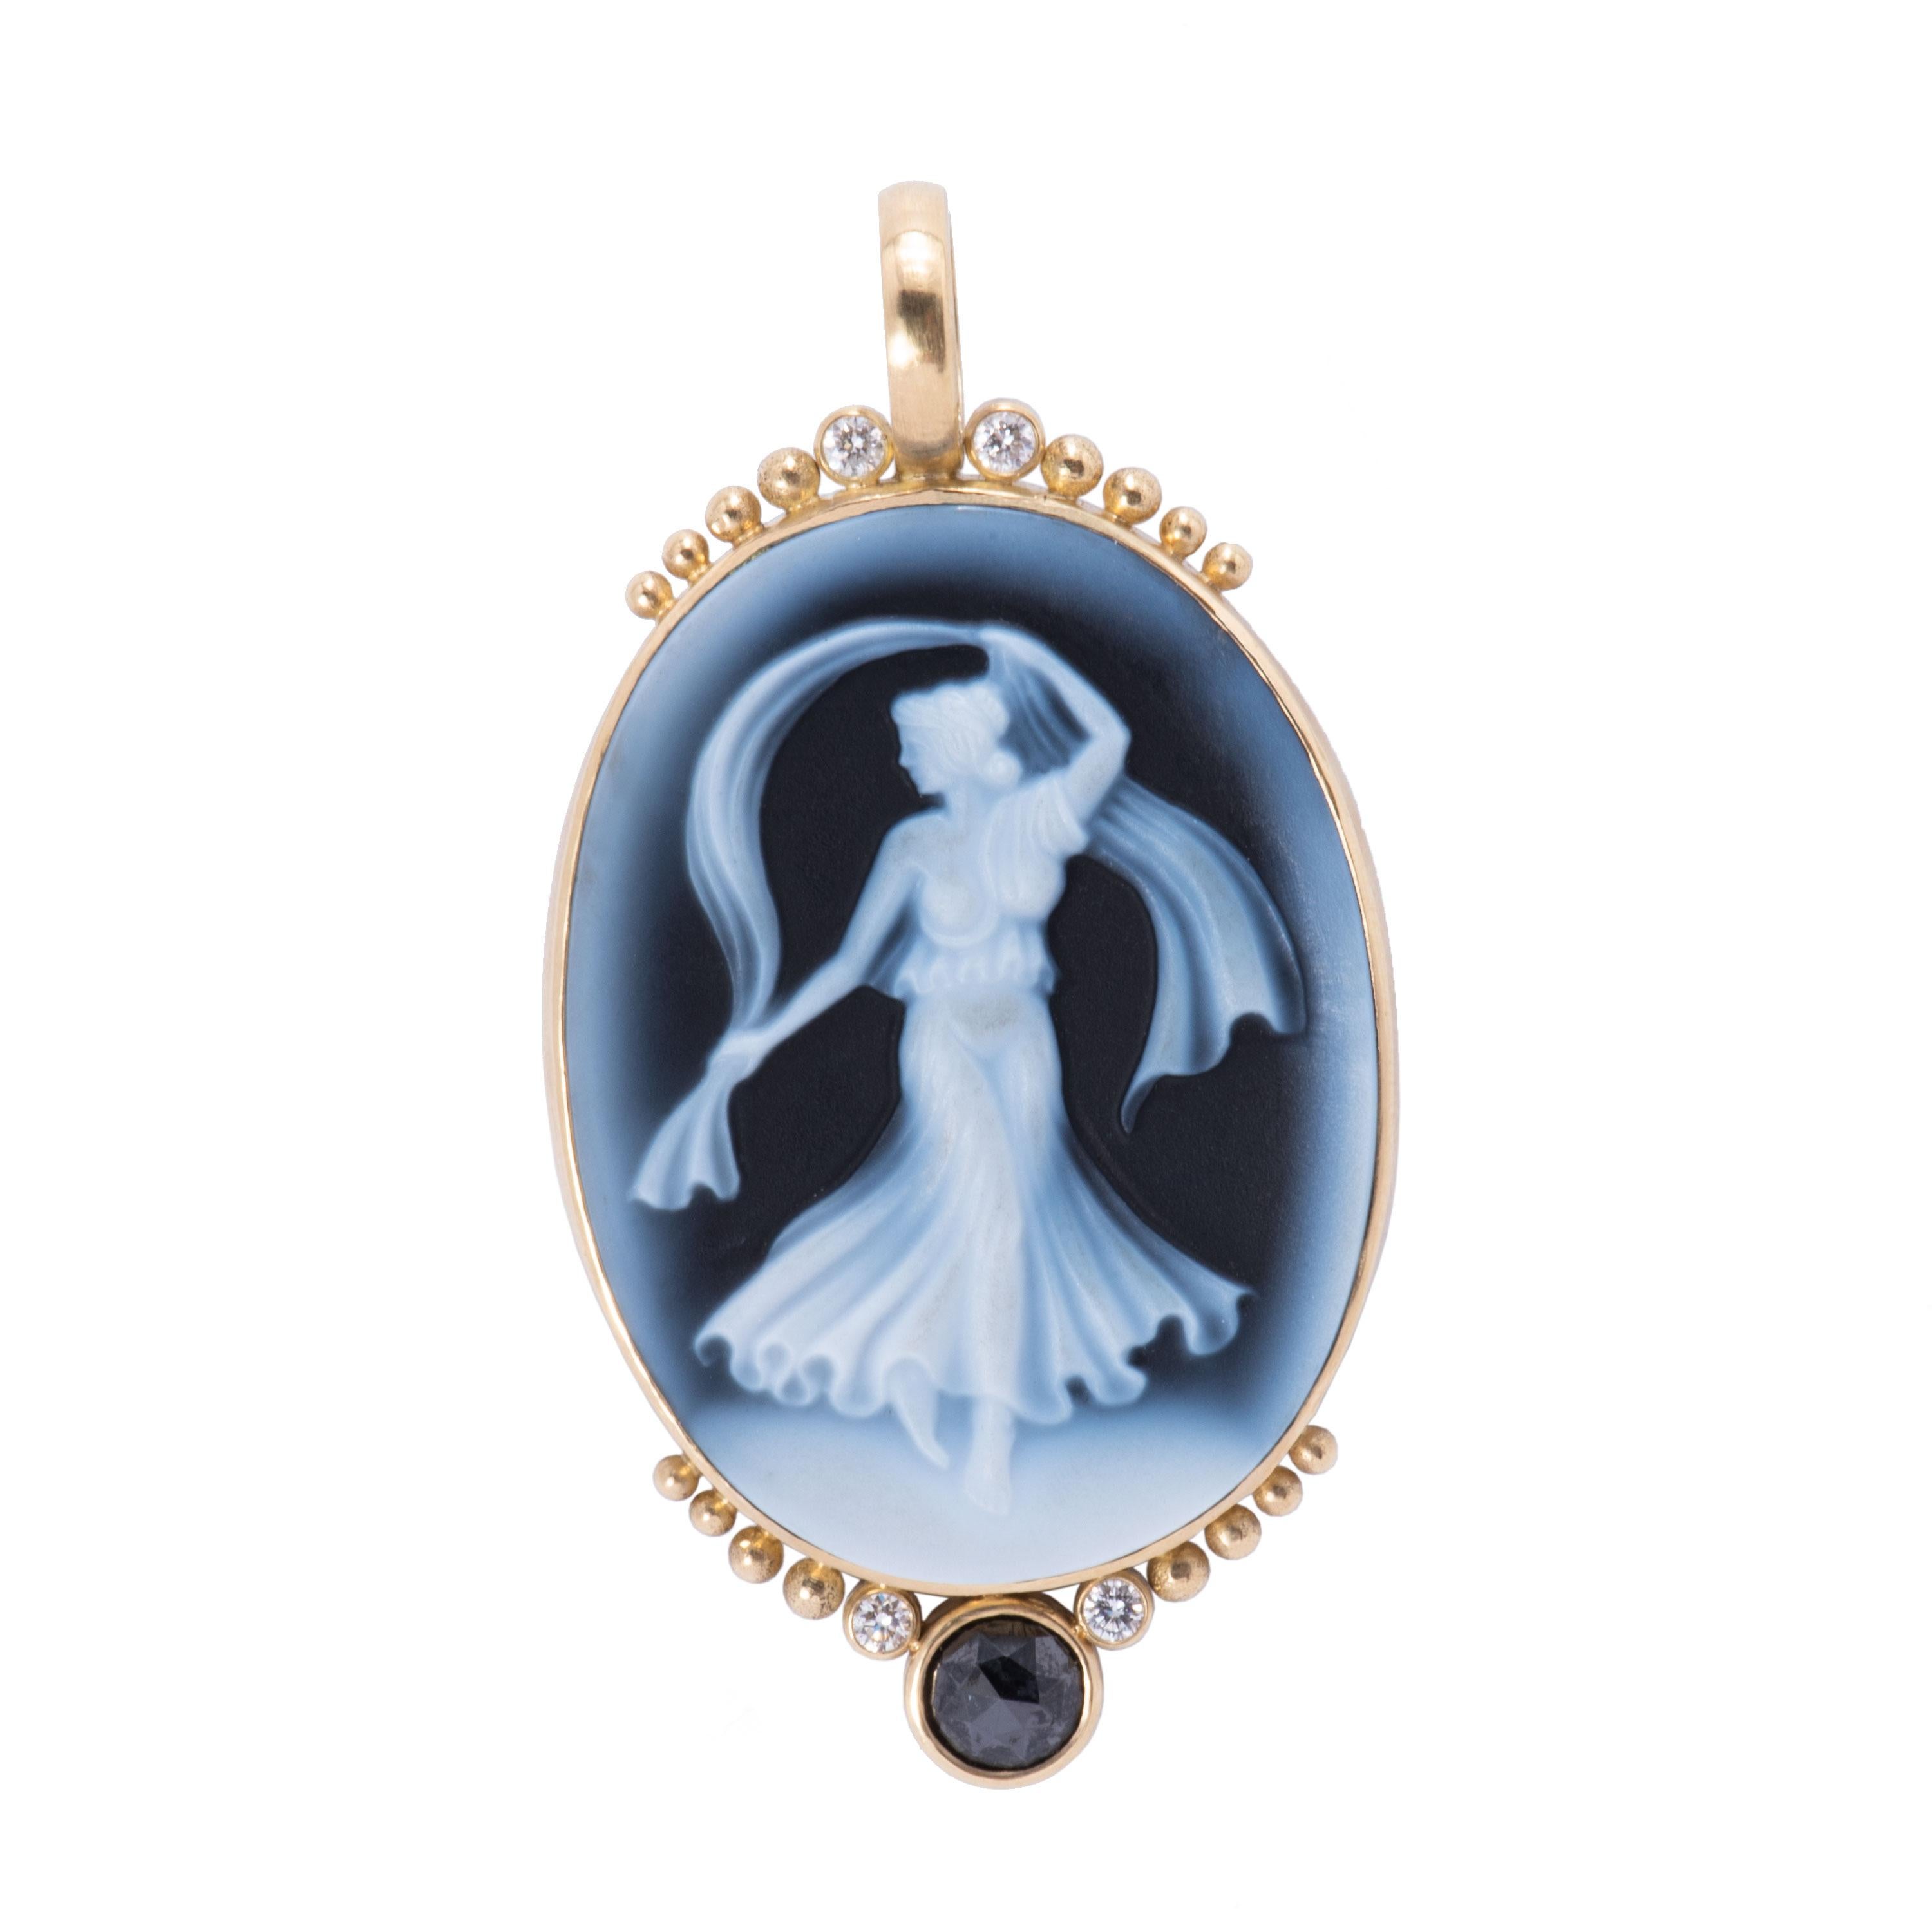 A large blue cameo pendant in carved agate depicts a woman dancing with a scarf in a diaphanous gown against a deep blue. Framed in 18 karat gold, the pendant is embellished with gold beads, a rose cut black diamond .89cts and white diamonds .28tcw.